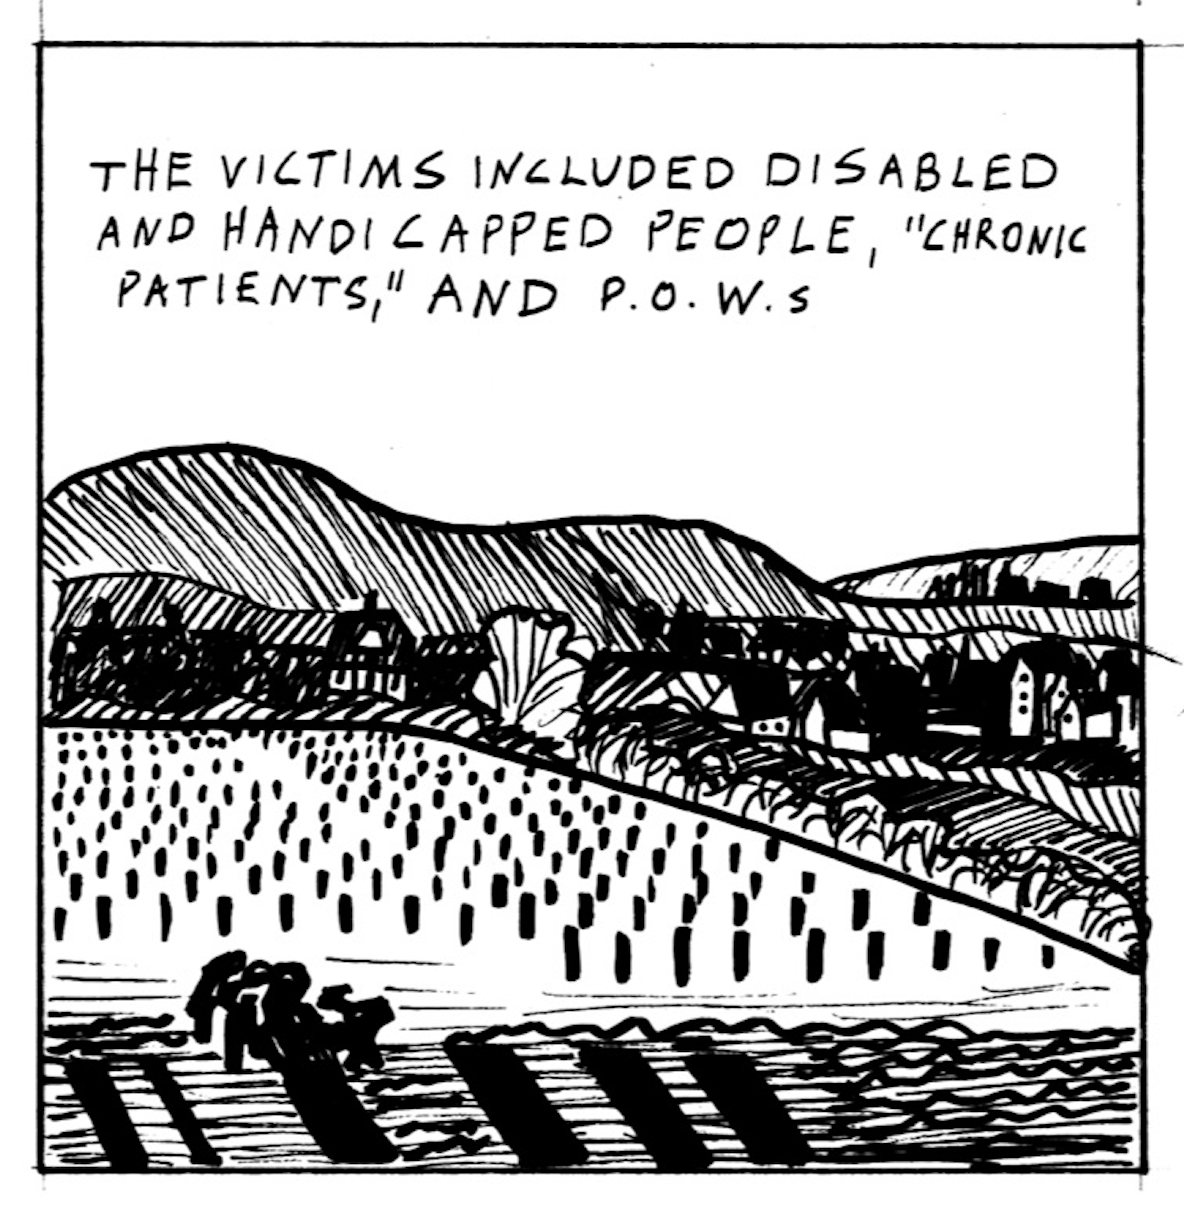 â€œThe victims included disabled and handicapped people, â€˜chronic patients,â€™ and P.O.W.s.â€ A cemetery surrounded by rolling hills and houses. 